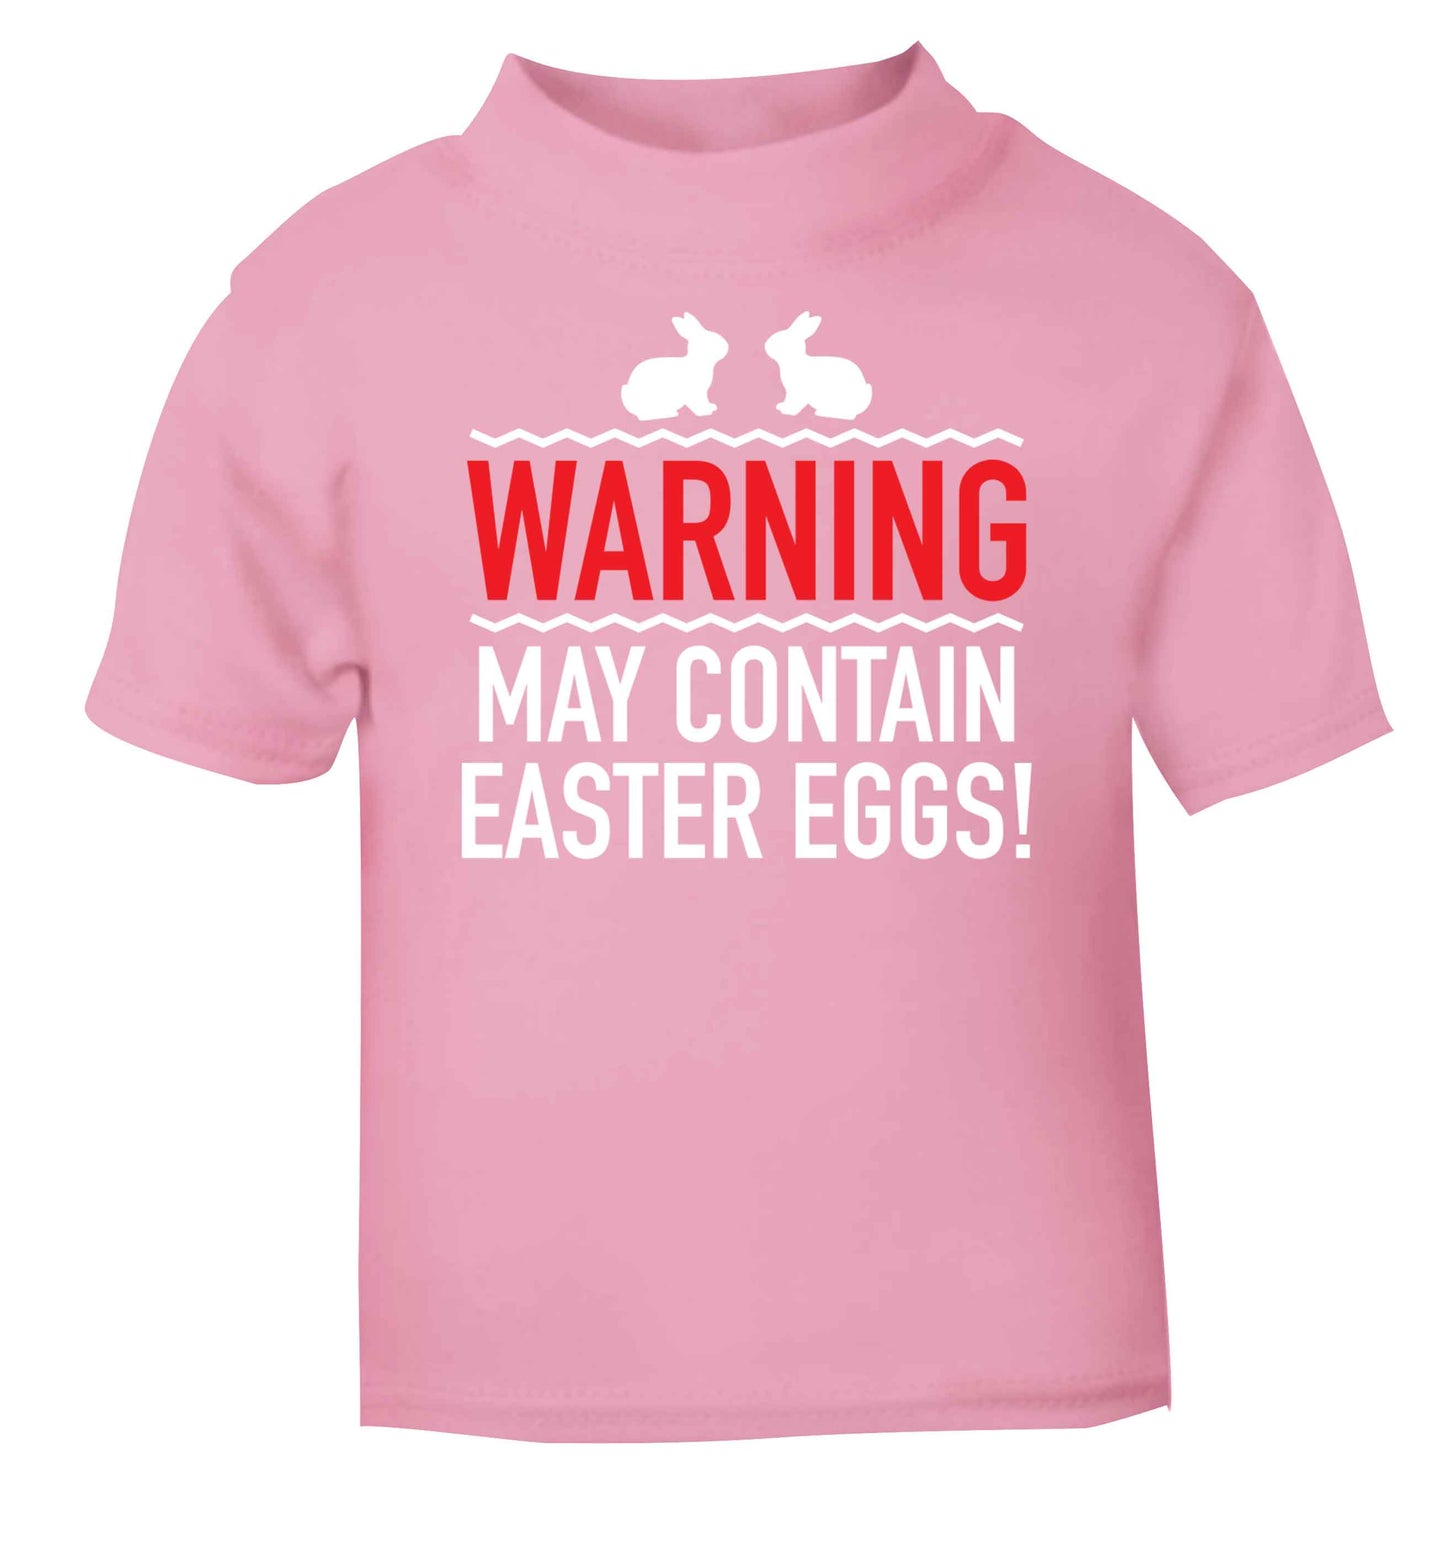 Warning may contain Easter eggs light pink baby toddler Tshirt 2 Years